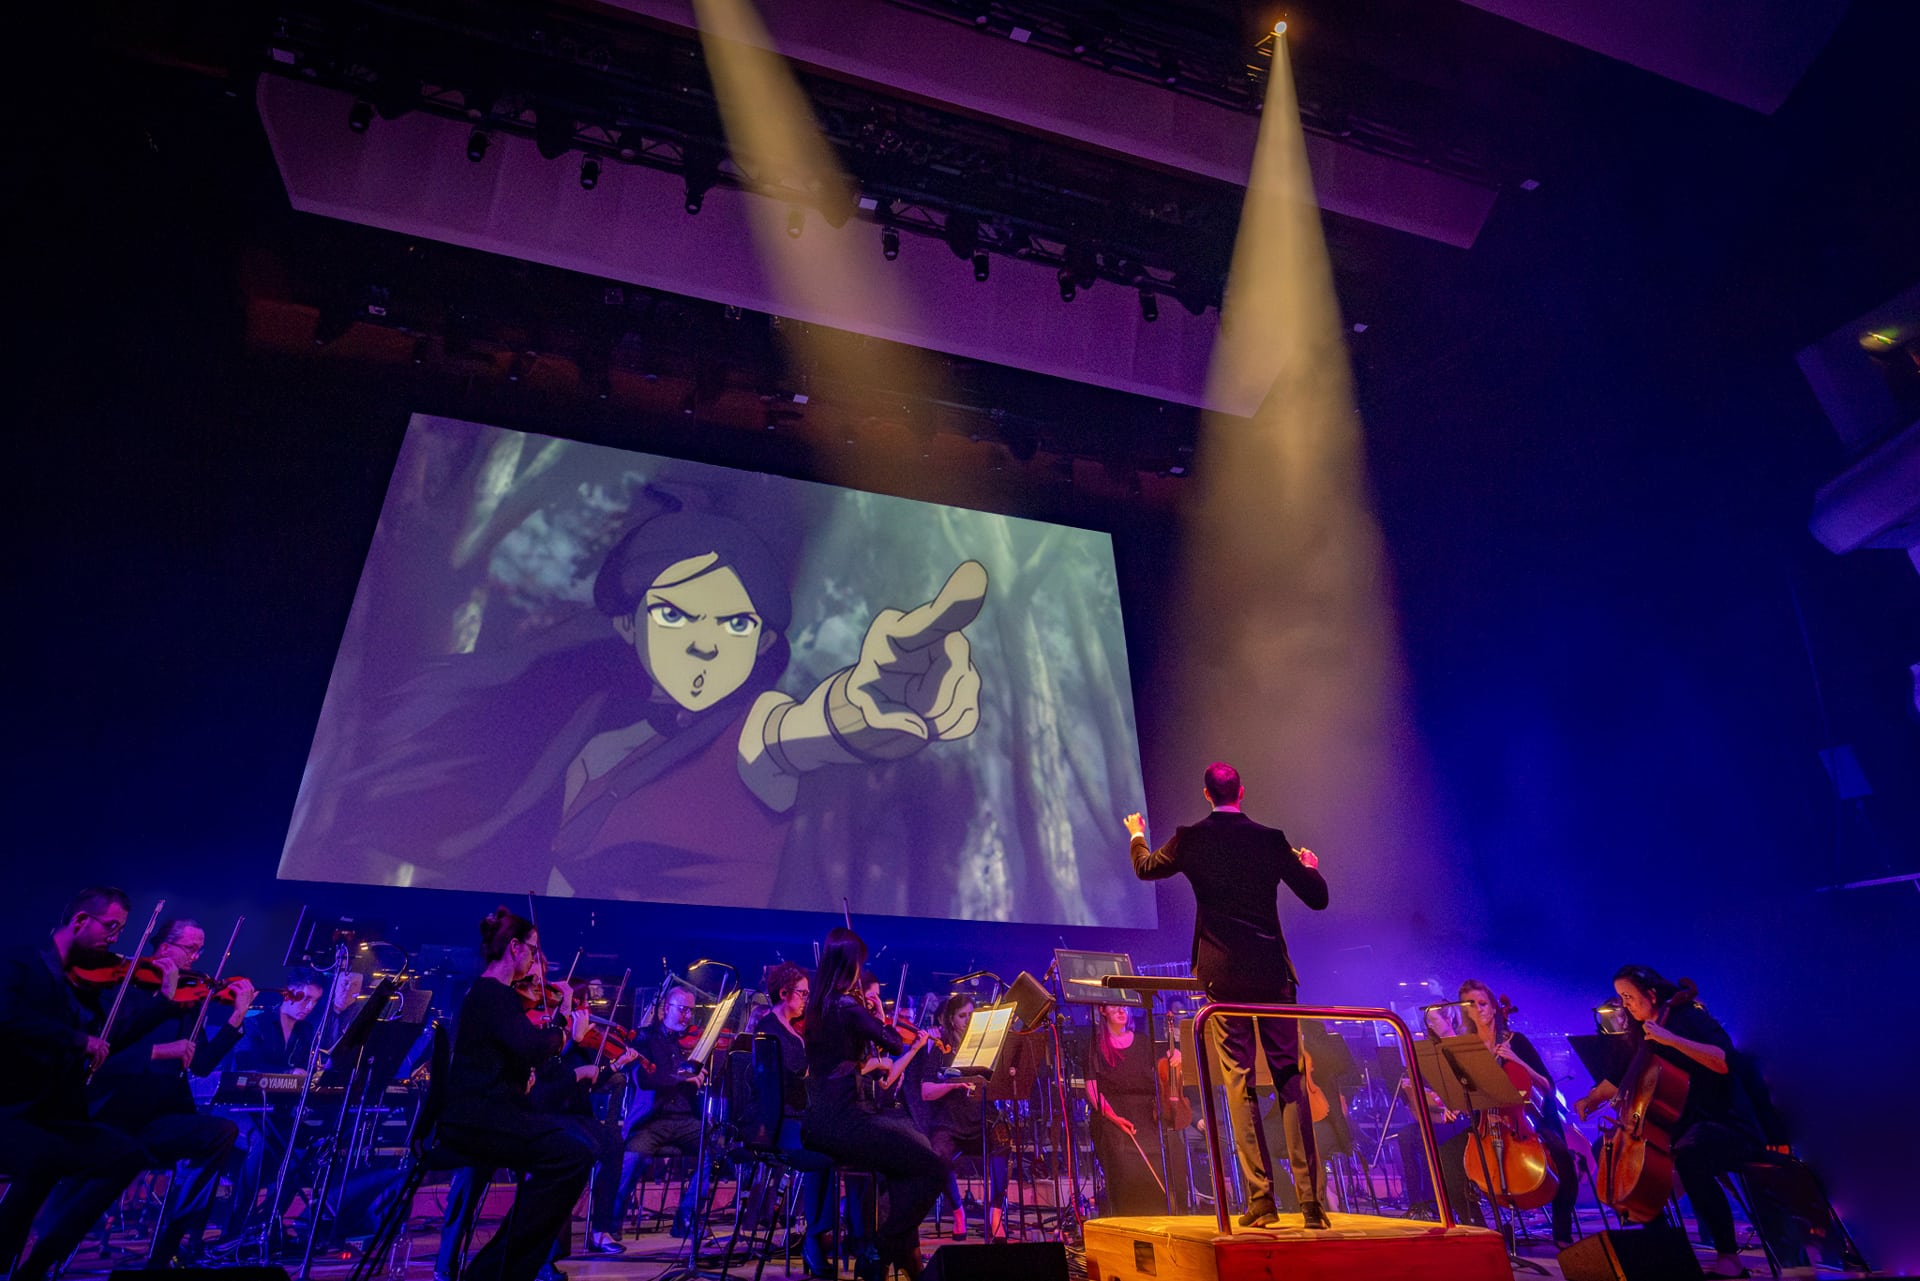 Avatar Concert on stage with orchestra with large screen playing show clips